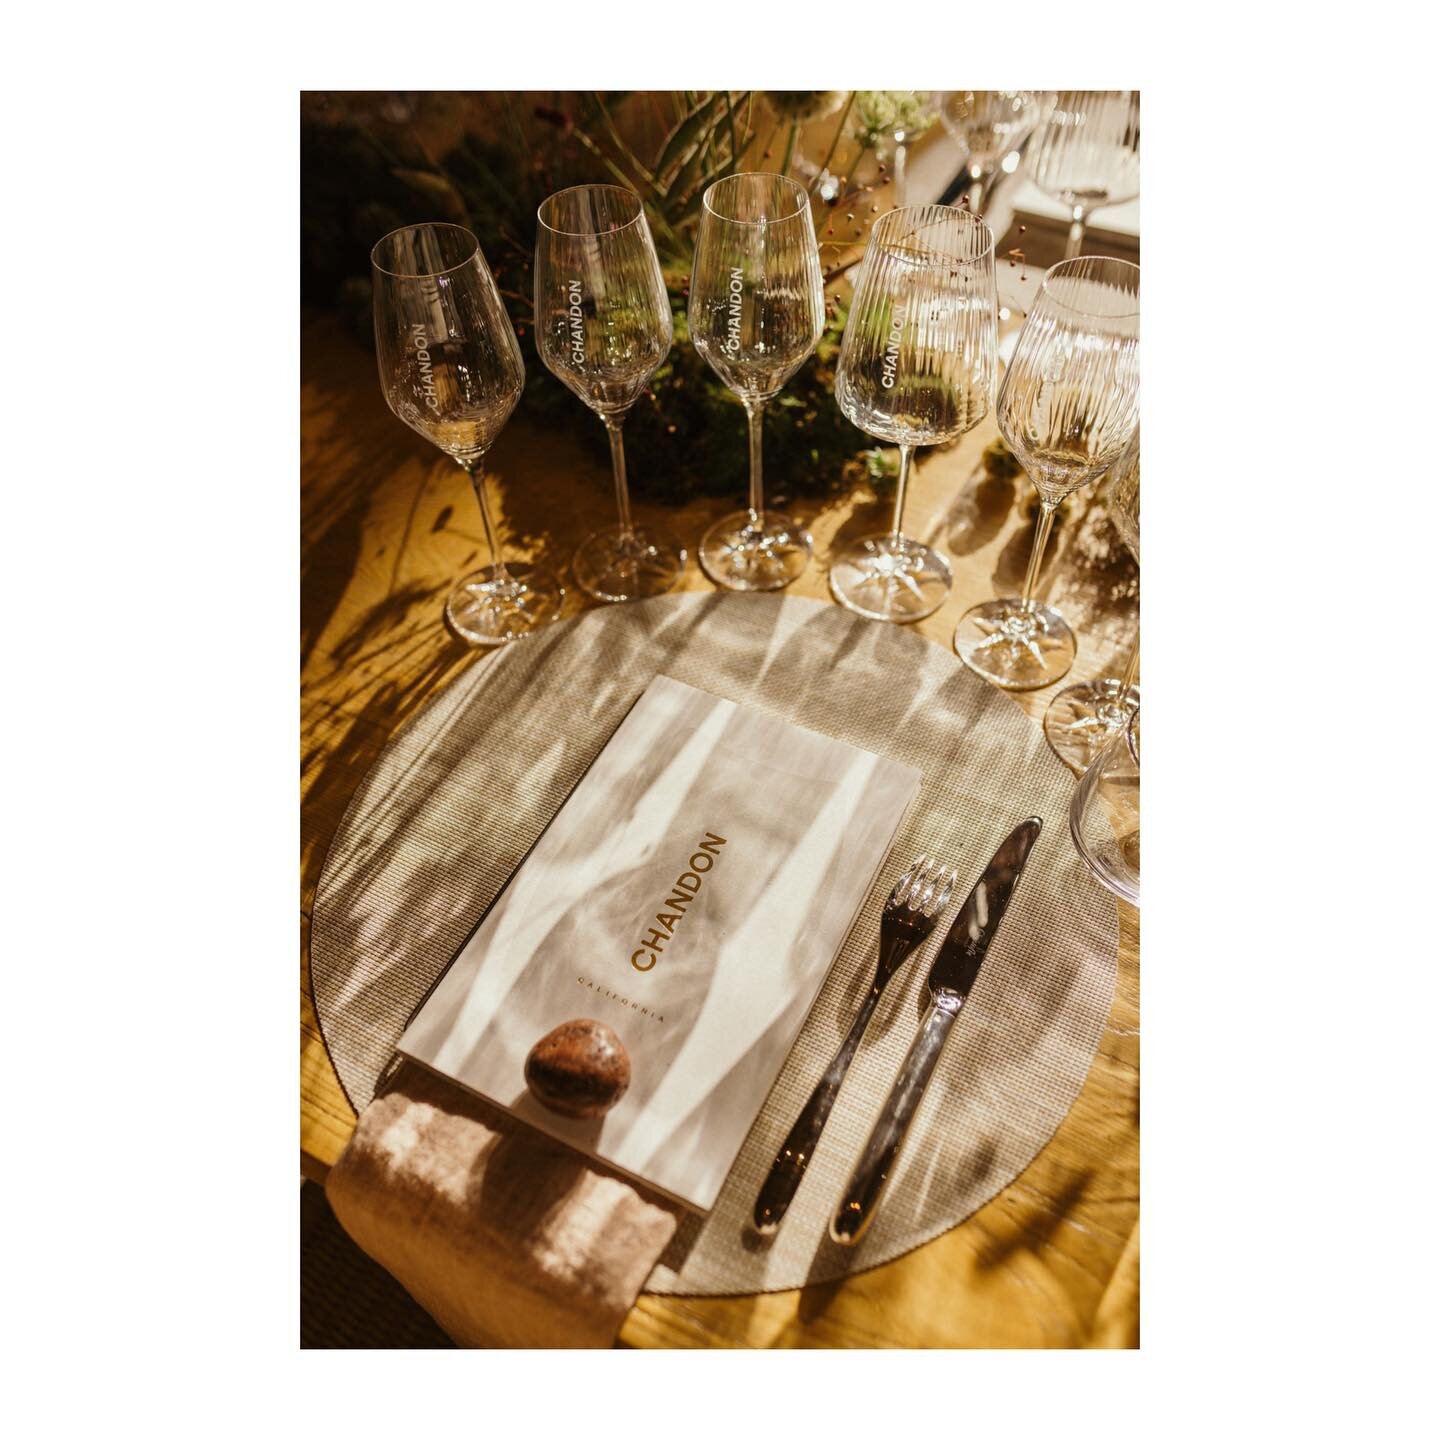 Shooting for @silvertiefilms at #Chandon in Yountville. There&rsquo;s nothing quite like the golden glow of sunset in Napa Valley. 

#napaphotographer #sacramentophotographer #allinthedetails #tablesetting #napavalleylife #visitcalifornia